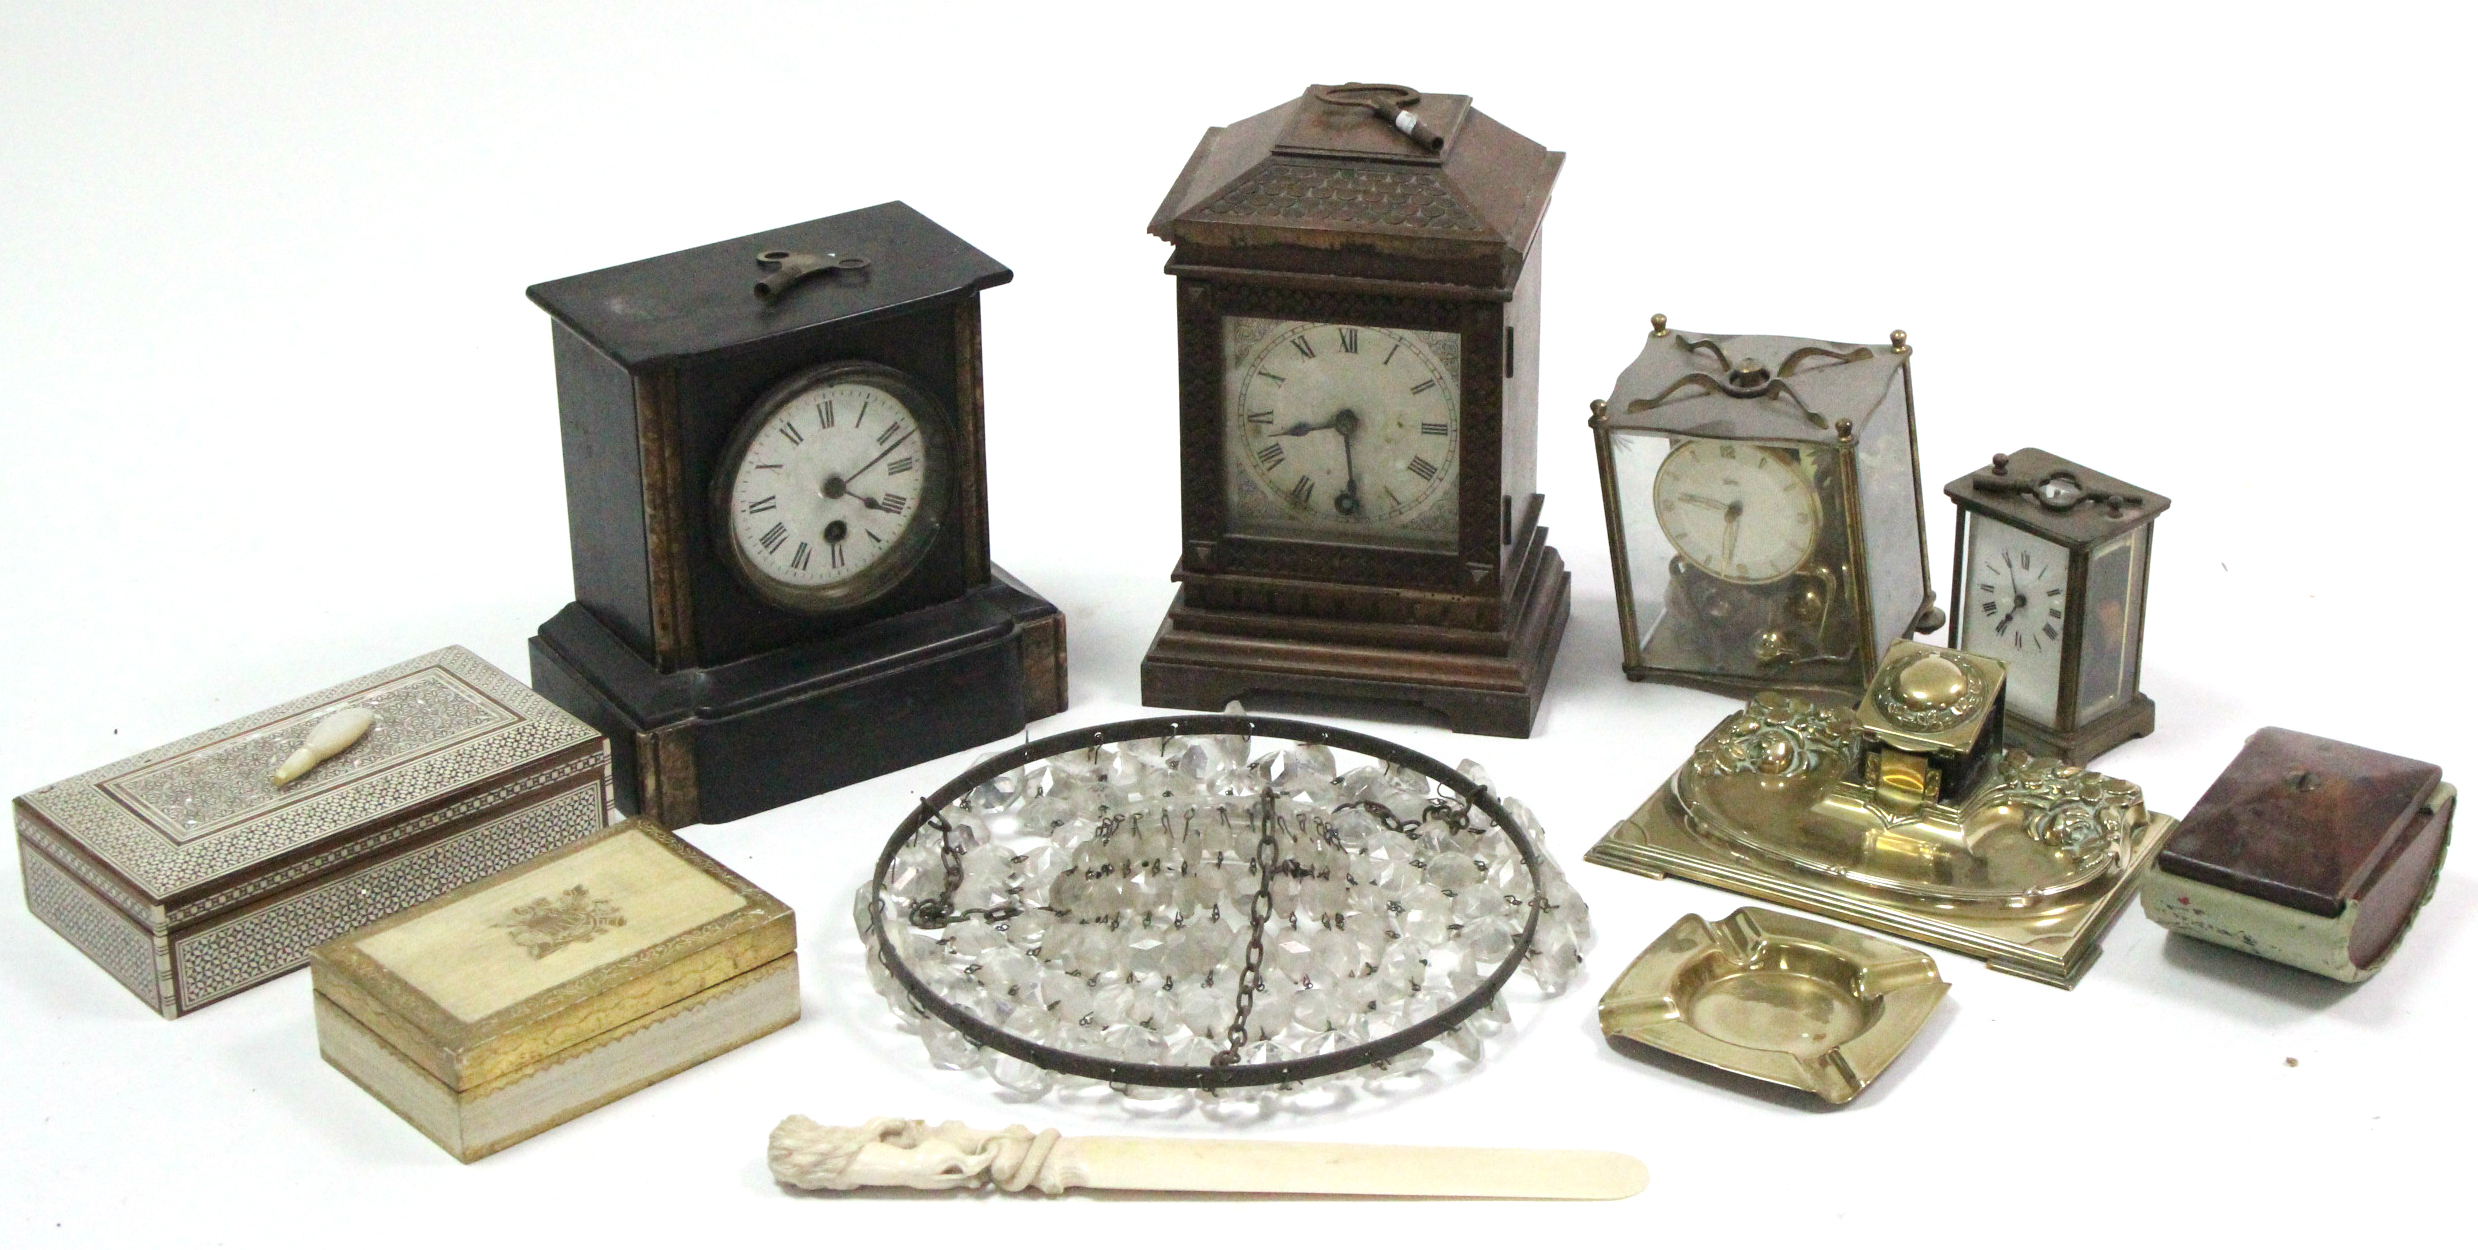 A 19th century mantel clock in black slate case; together with two other mantel clocks; a brass